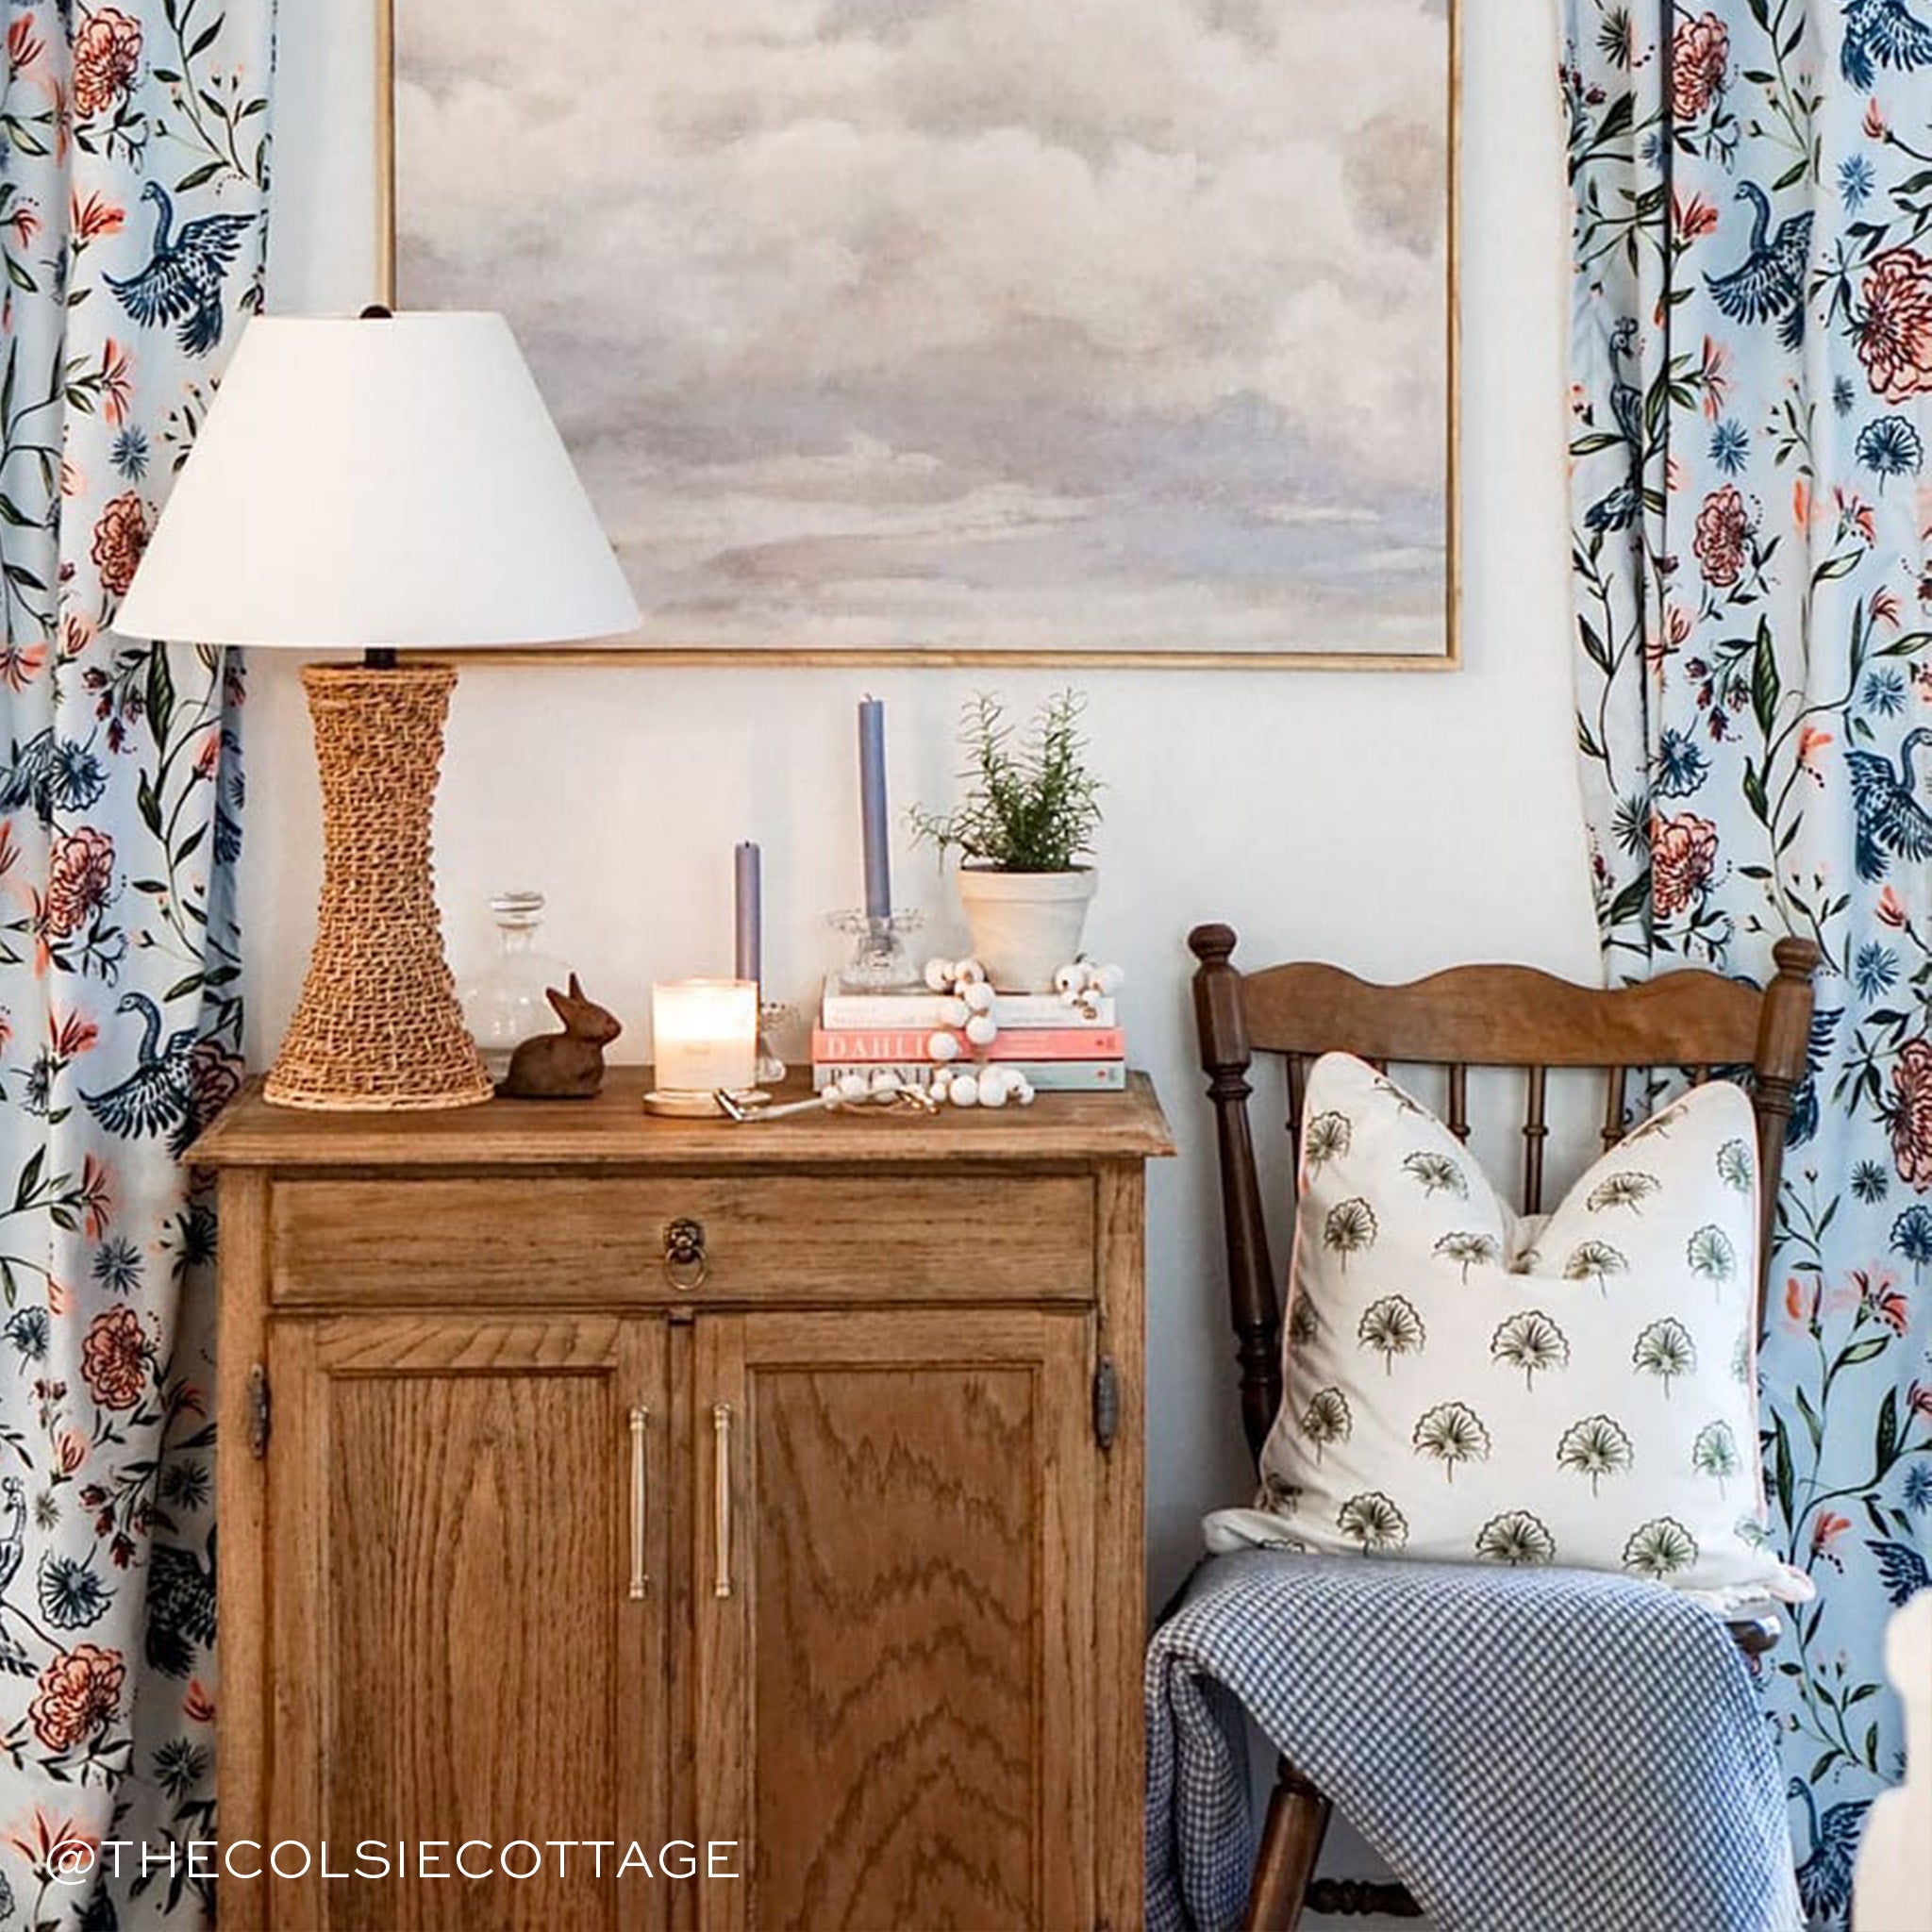 Blue Chinoiserie Printed Curtains on the sides of wooden chair with green floral pillow and navy blanket by wooden dresser with lamp, lavender candles, plant, and books stacked on top. Photo taken by The Colsie Cottage